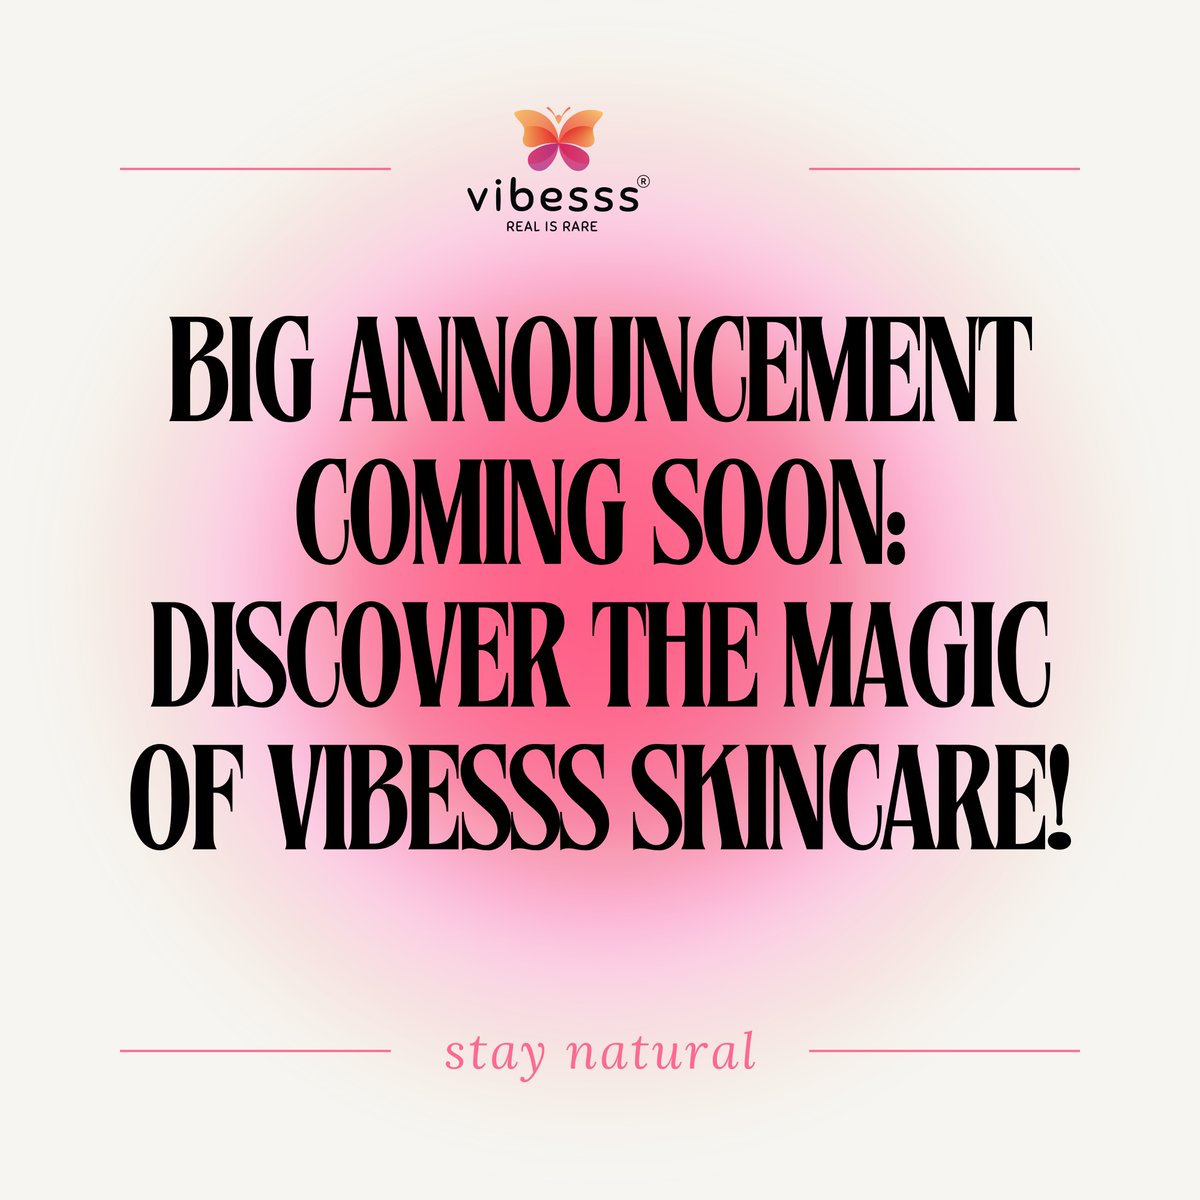 Big Announcement Coming Soon: Discover the Magic of Vibesss Skincare!

#VibesssIndia #Vibesssproducts #VibesssGulabjal #VibesssRealisrare #VibesssProduct #Comingsoon #Launchingsoon #realisrare #vibesssrosenerfacemist